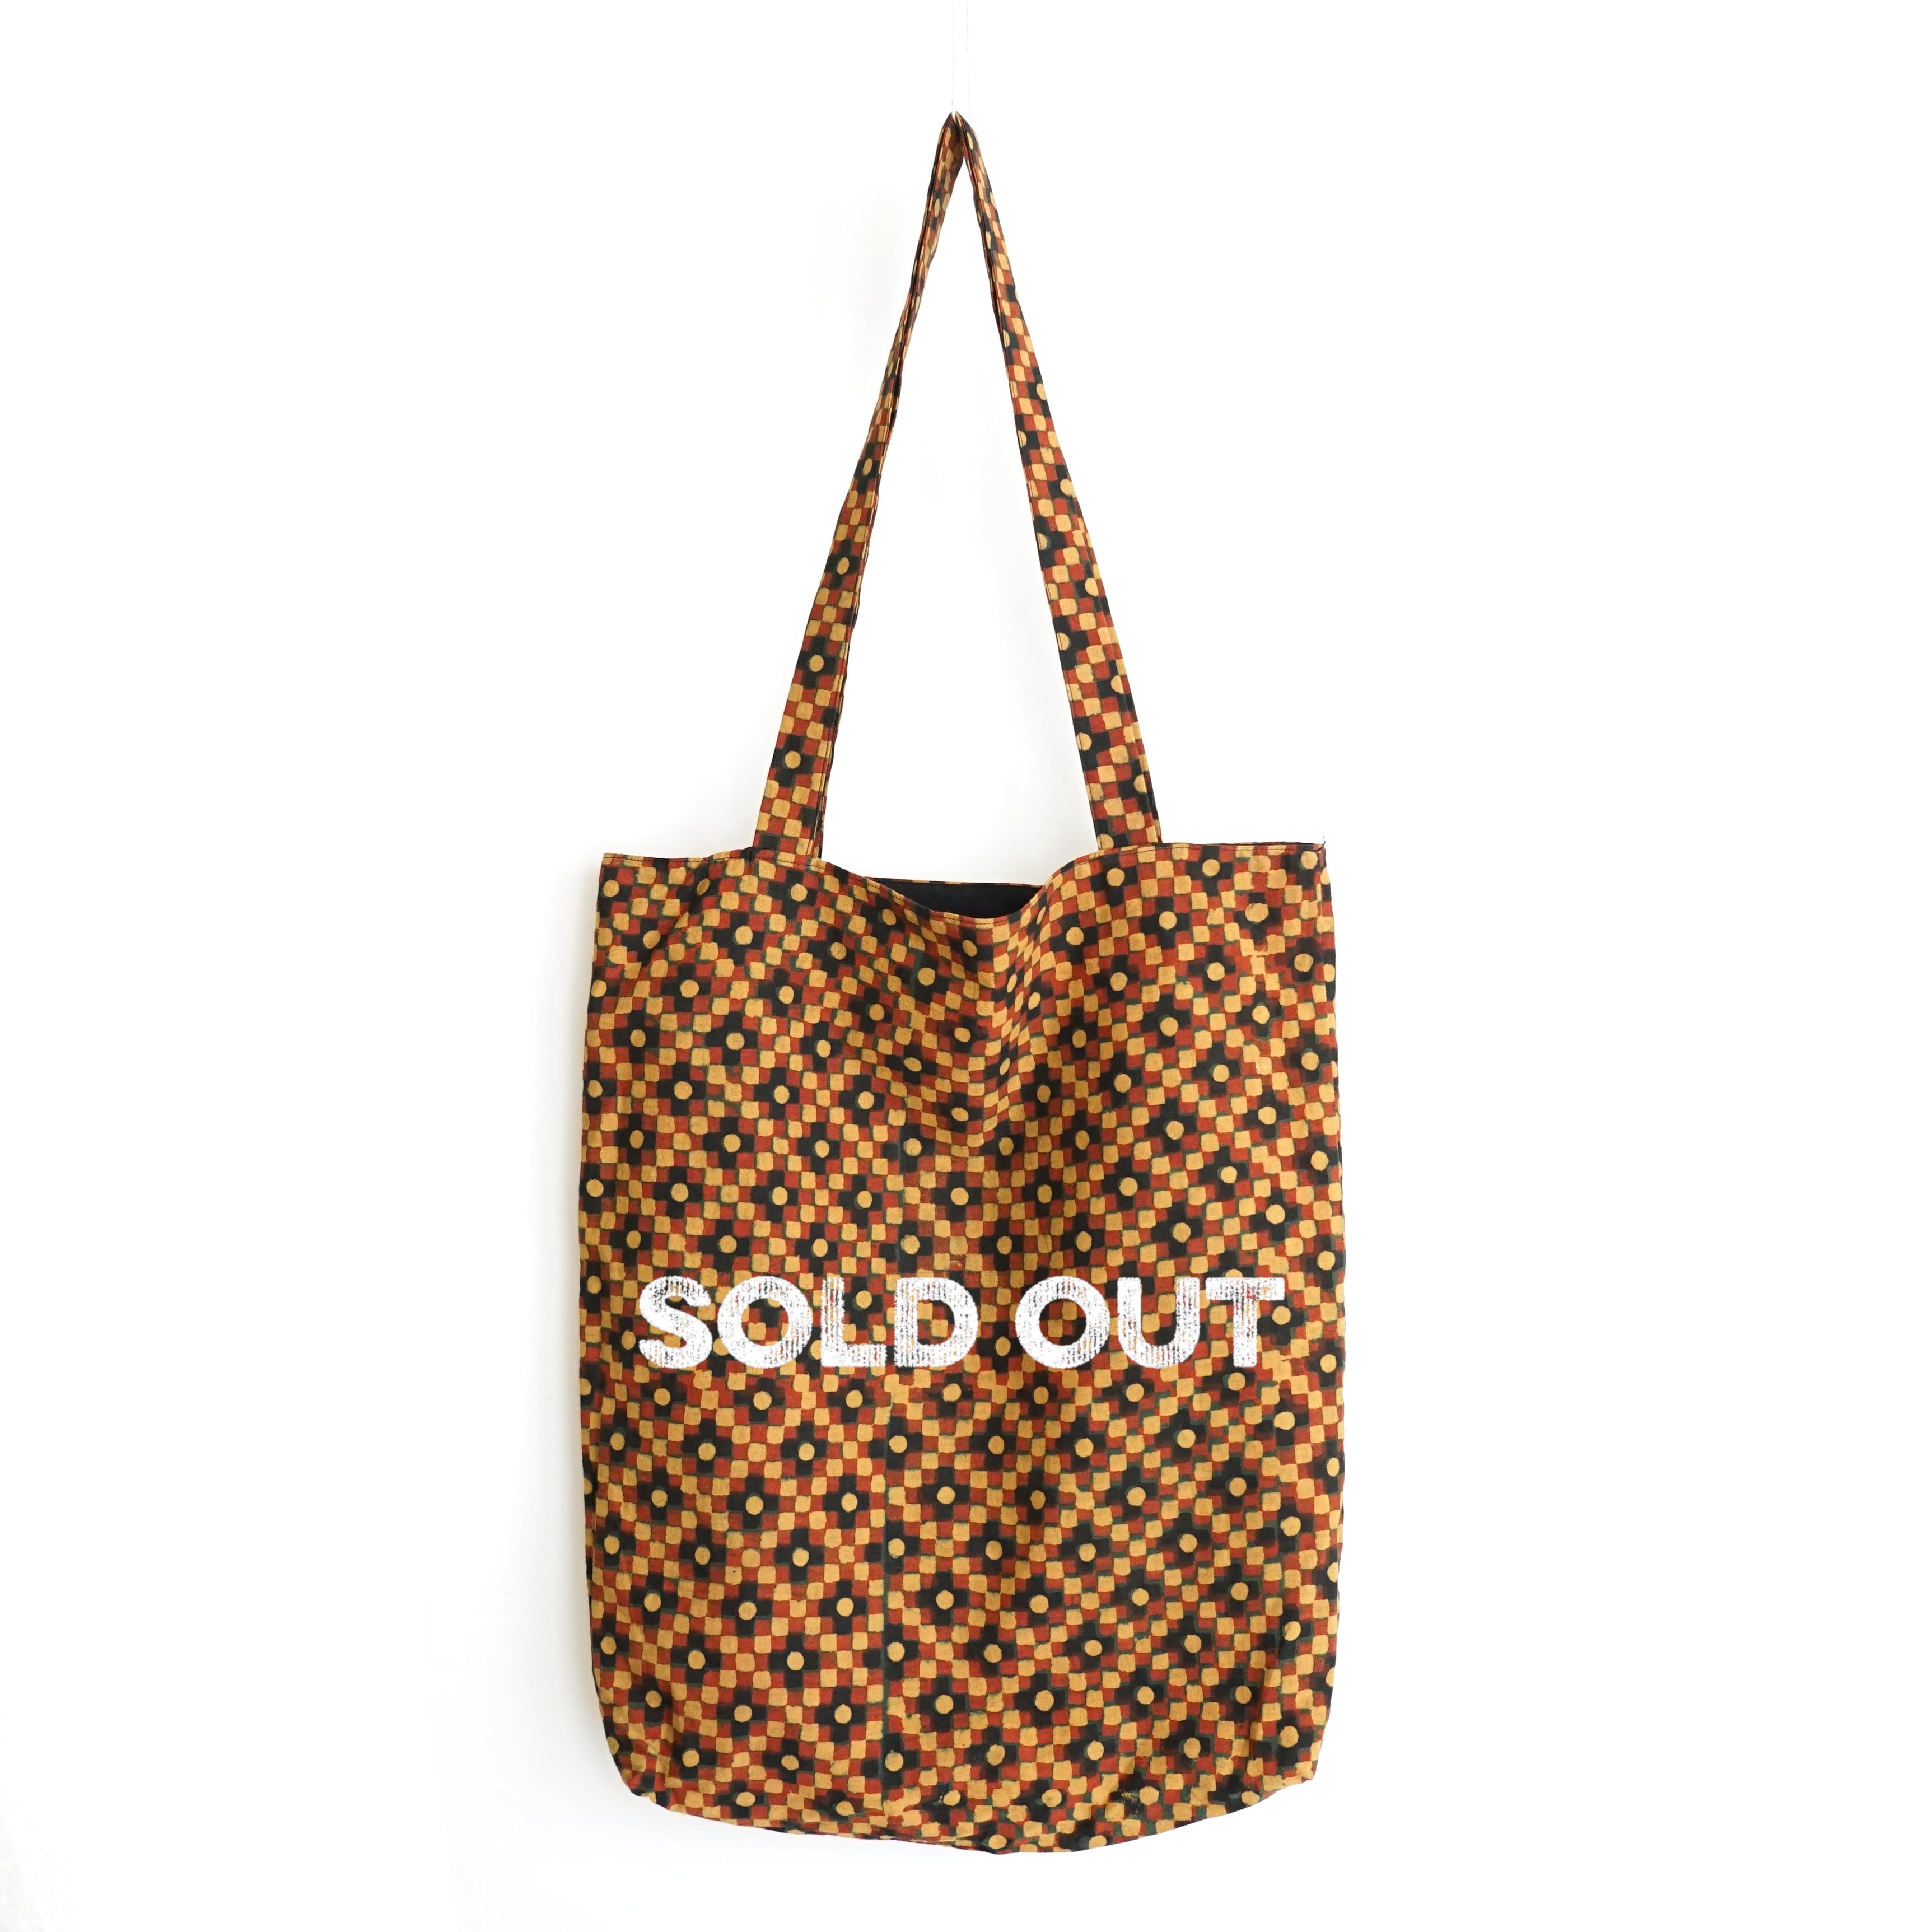 block printed tote bag, black, orange yellow green square design, lined with black cotton, closed